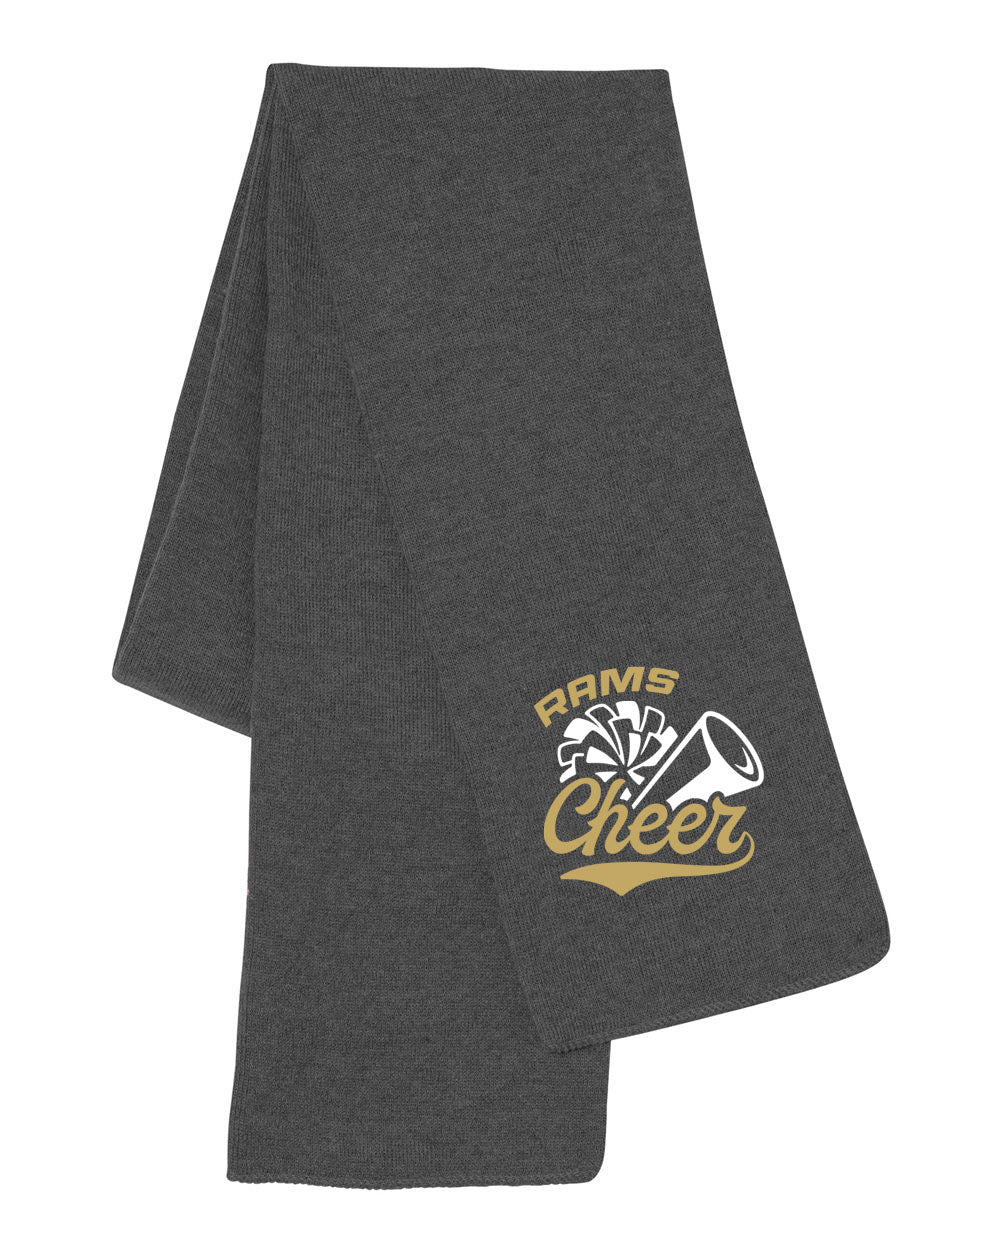 Sussex Middle Cheer Design 1 Scarf